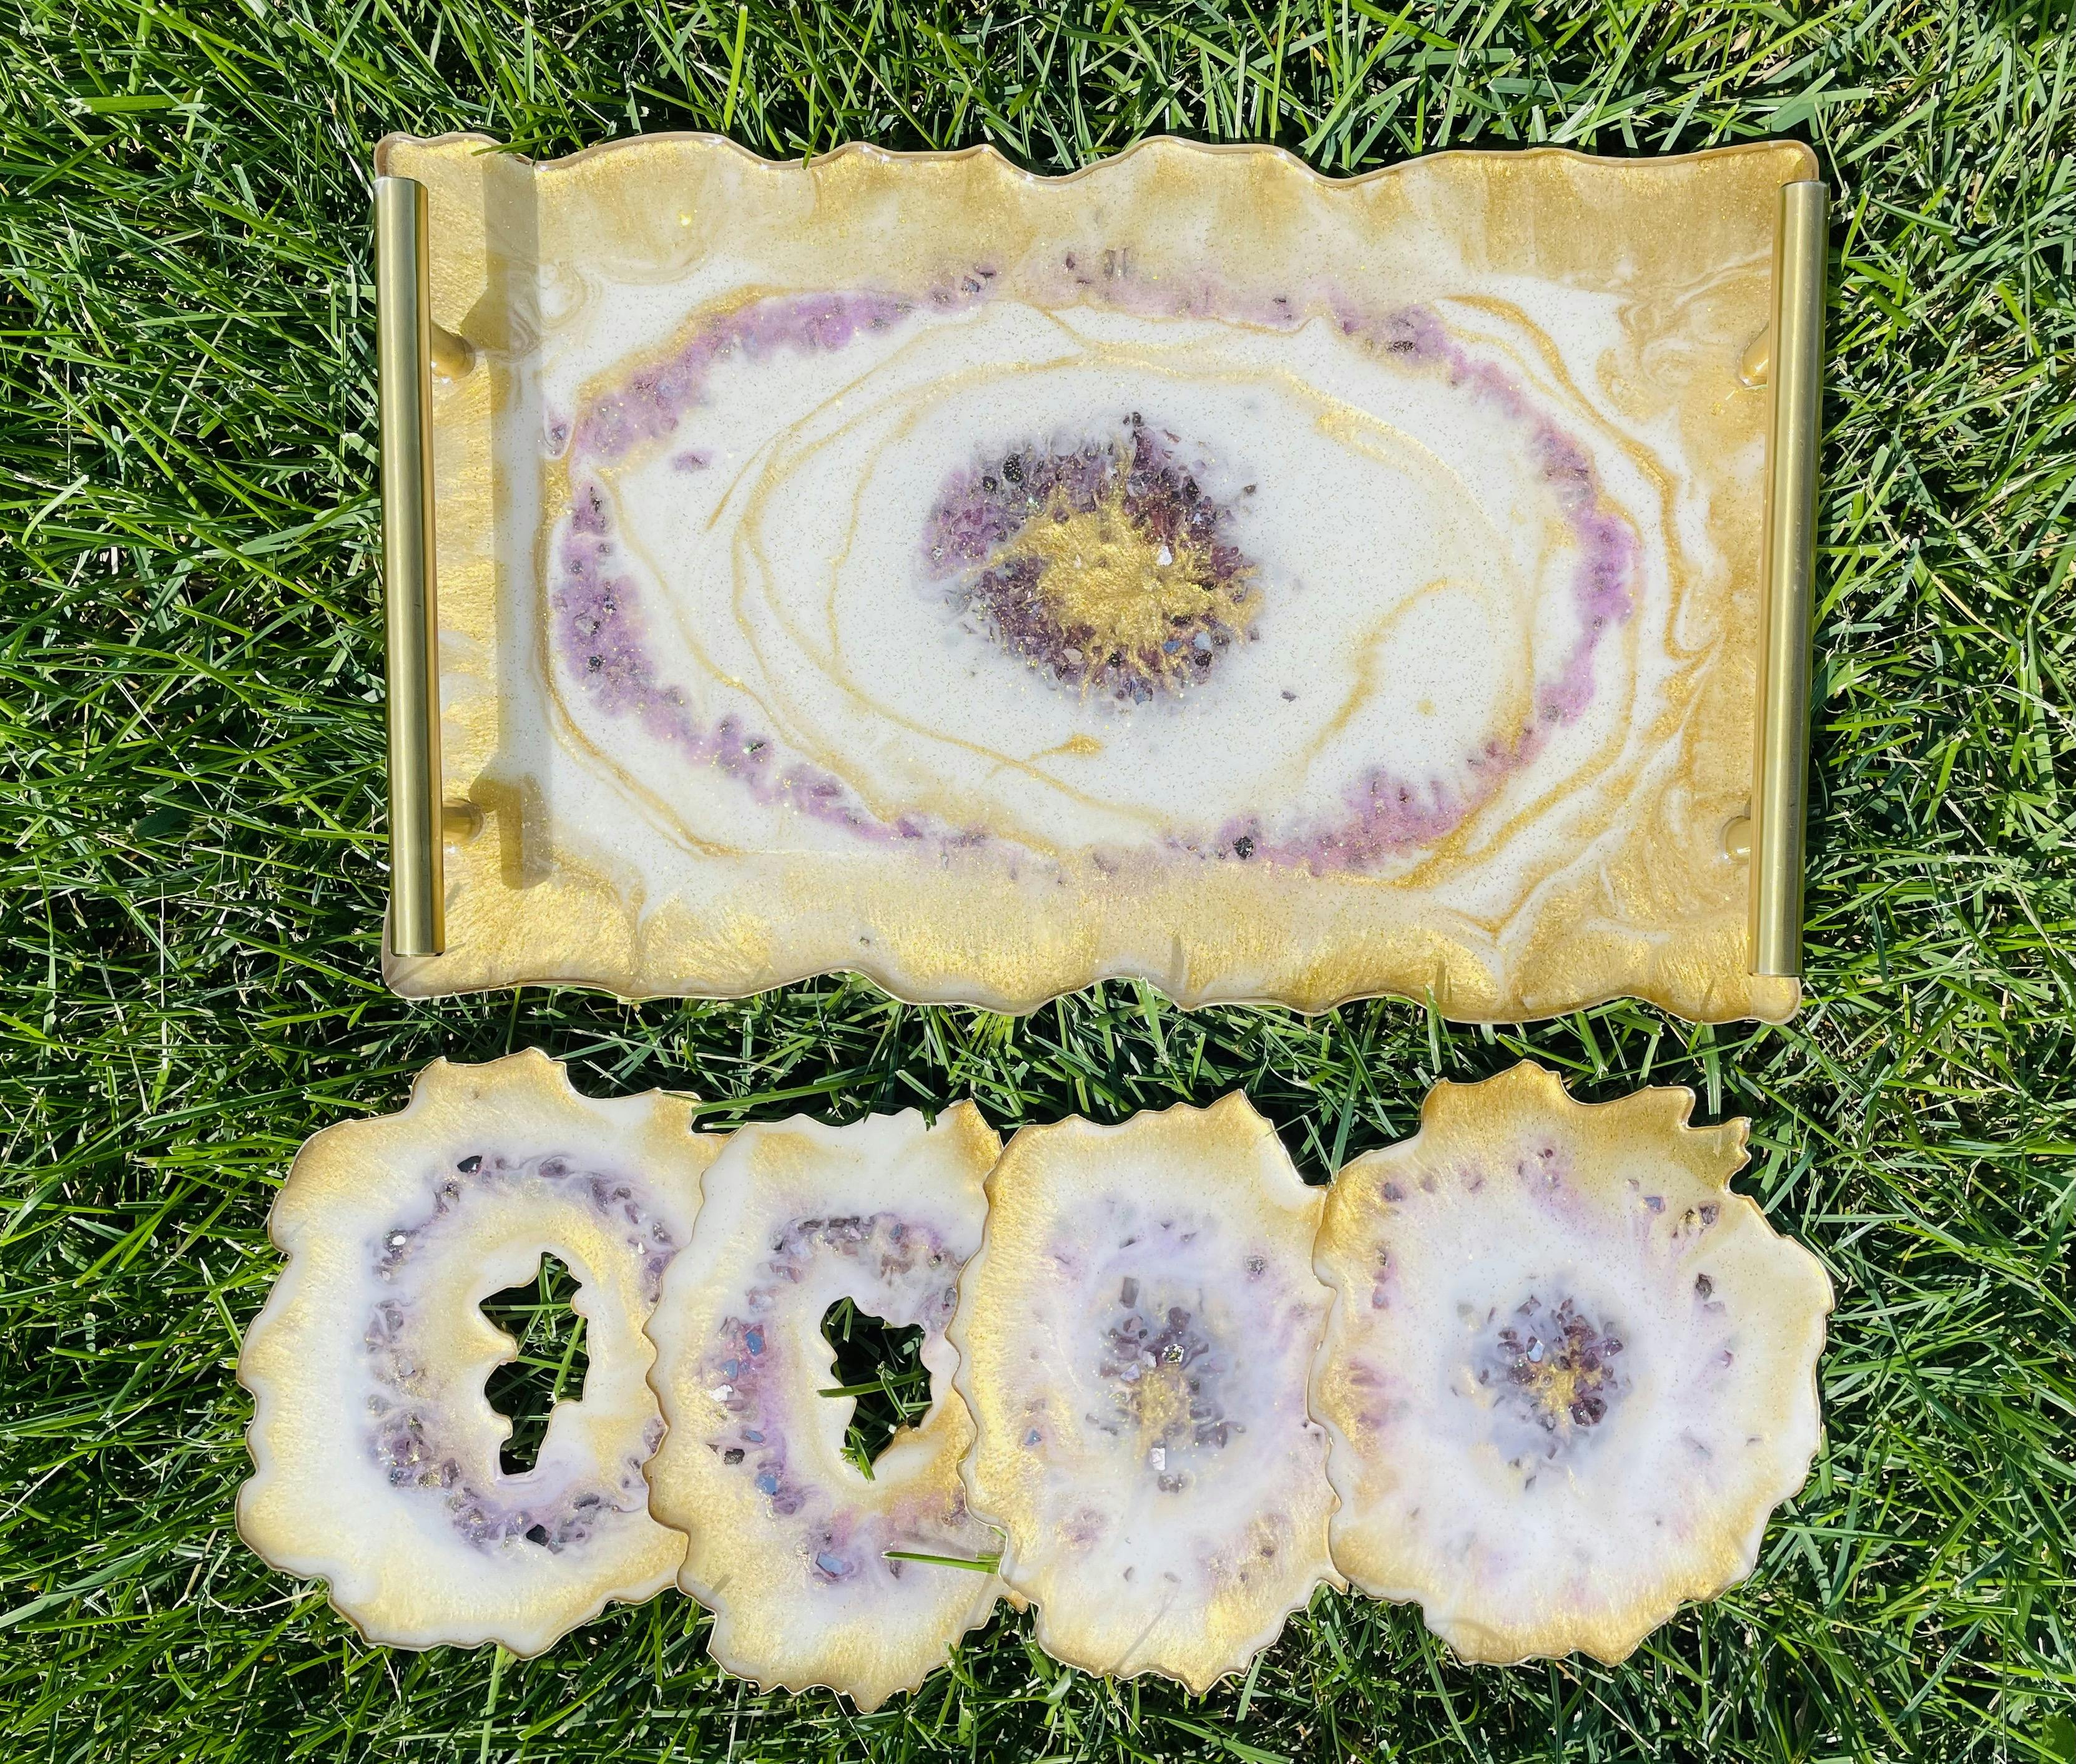 Sparkly Glam Decorative Geode Tray and Coasters